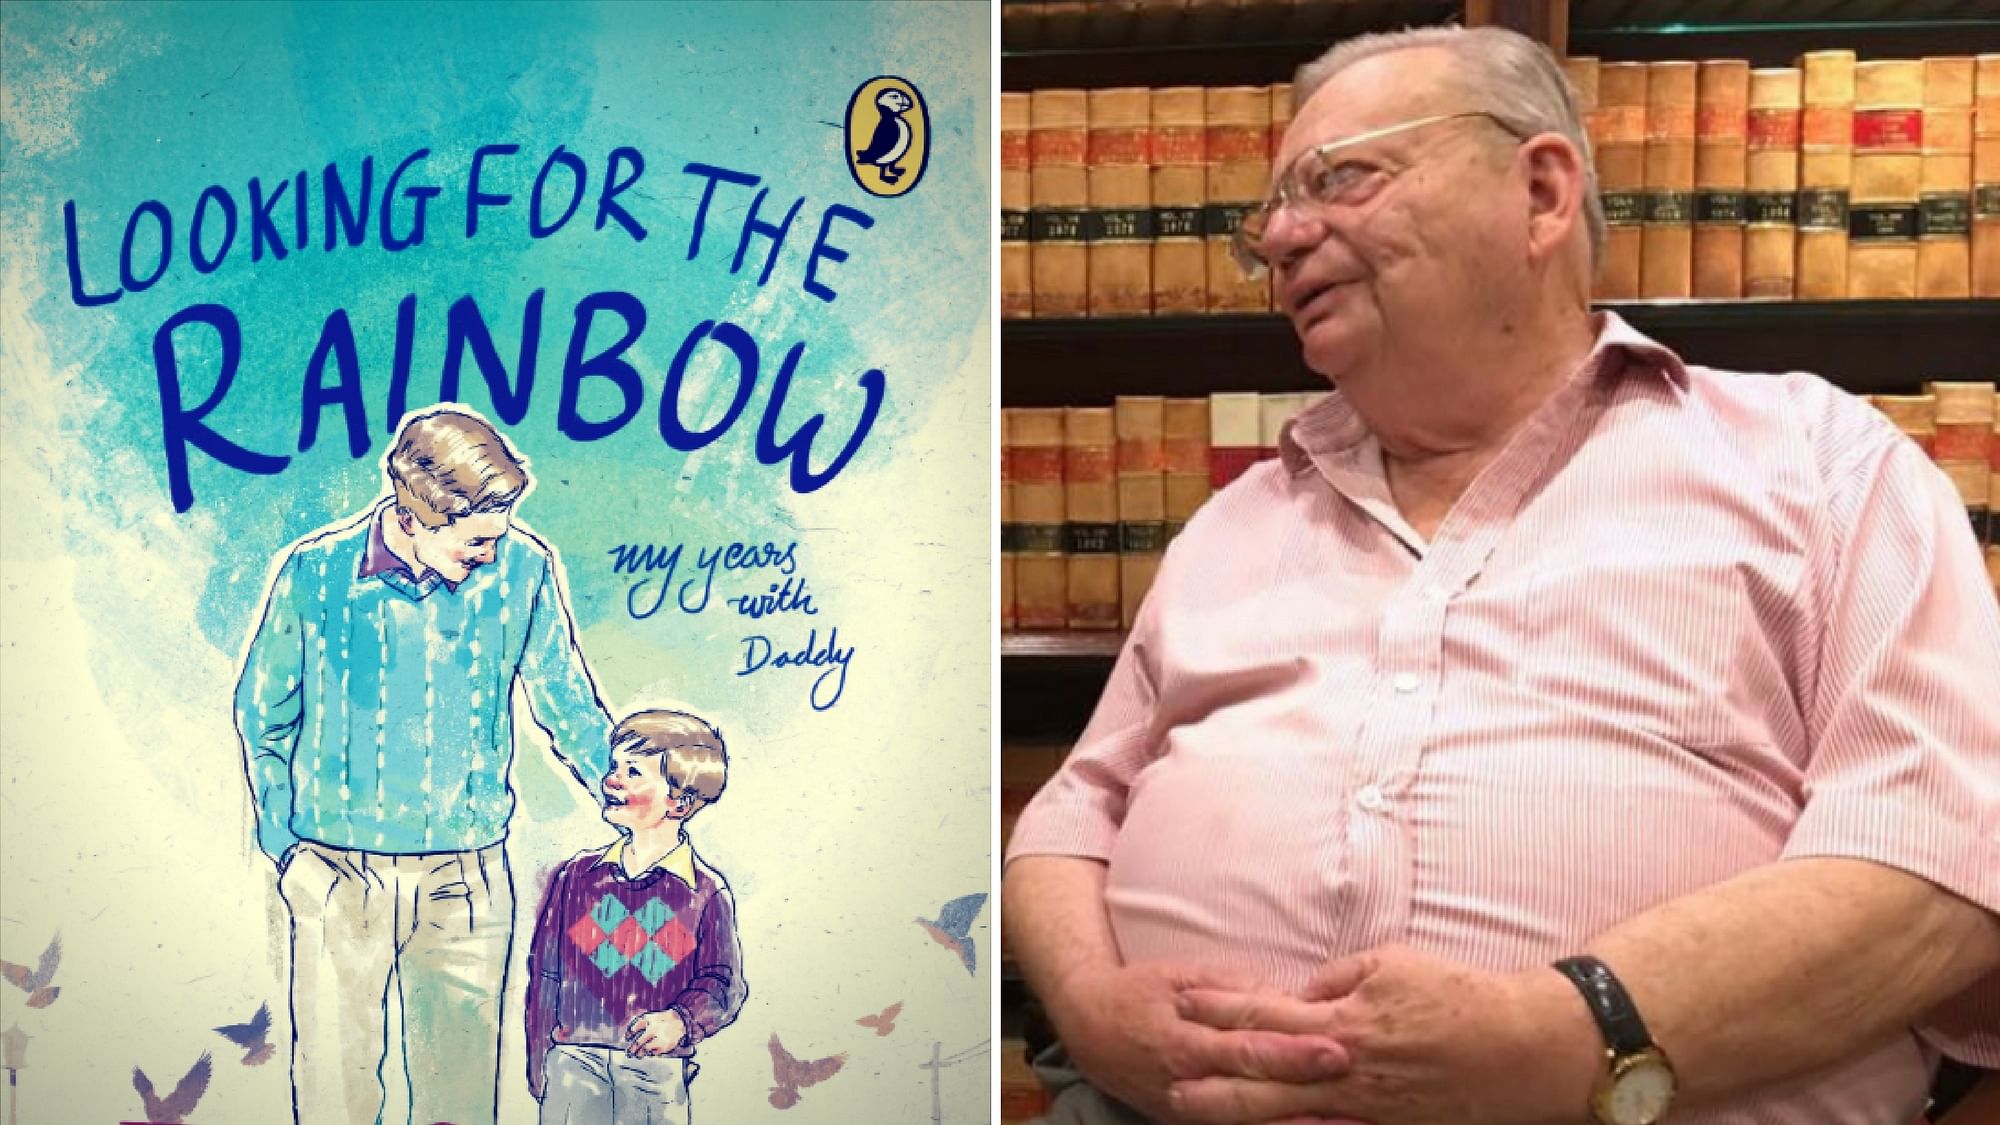 Through his book – <i>Looking for the Rainbow: My Year with Daddy</i>, Bond shares what he has shared before: stories of his father.